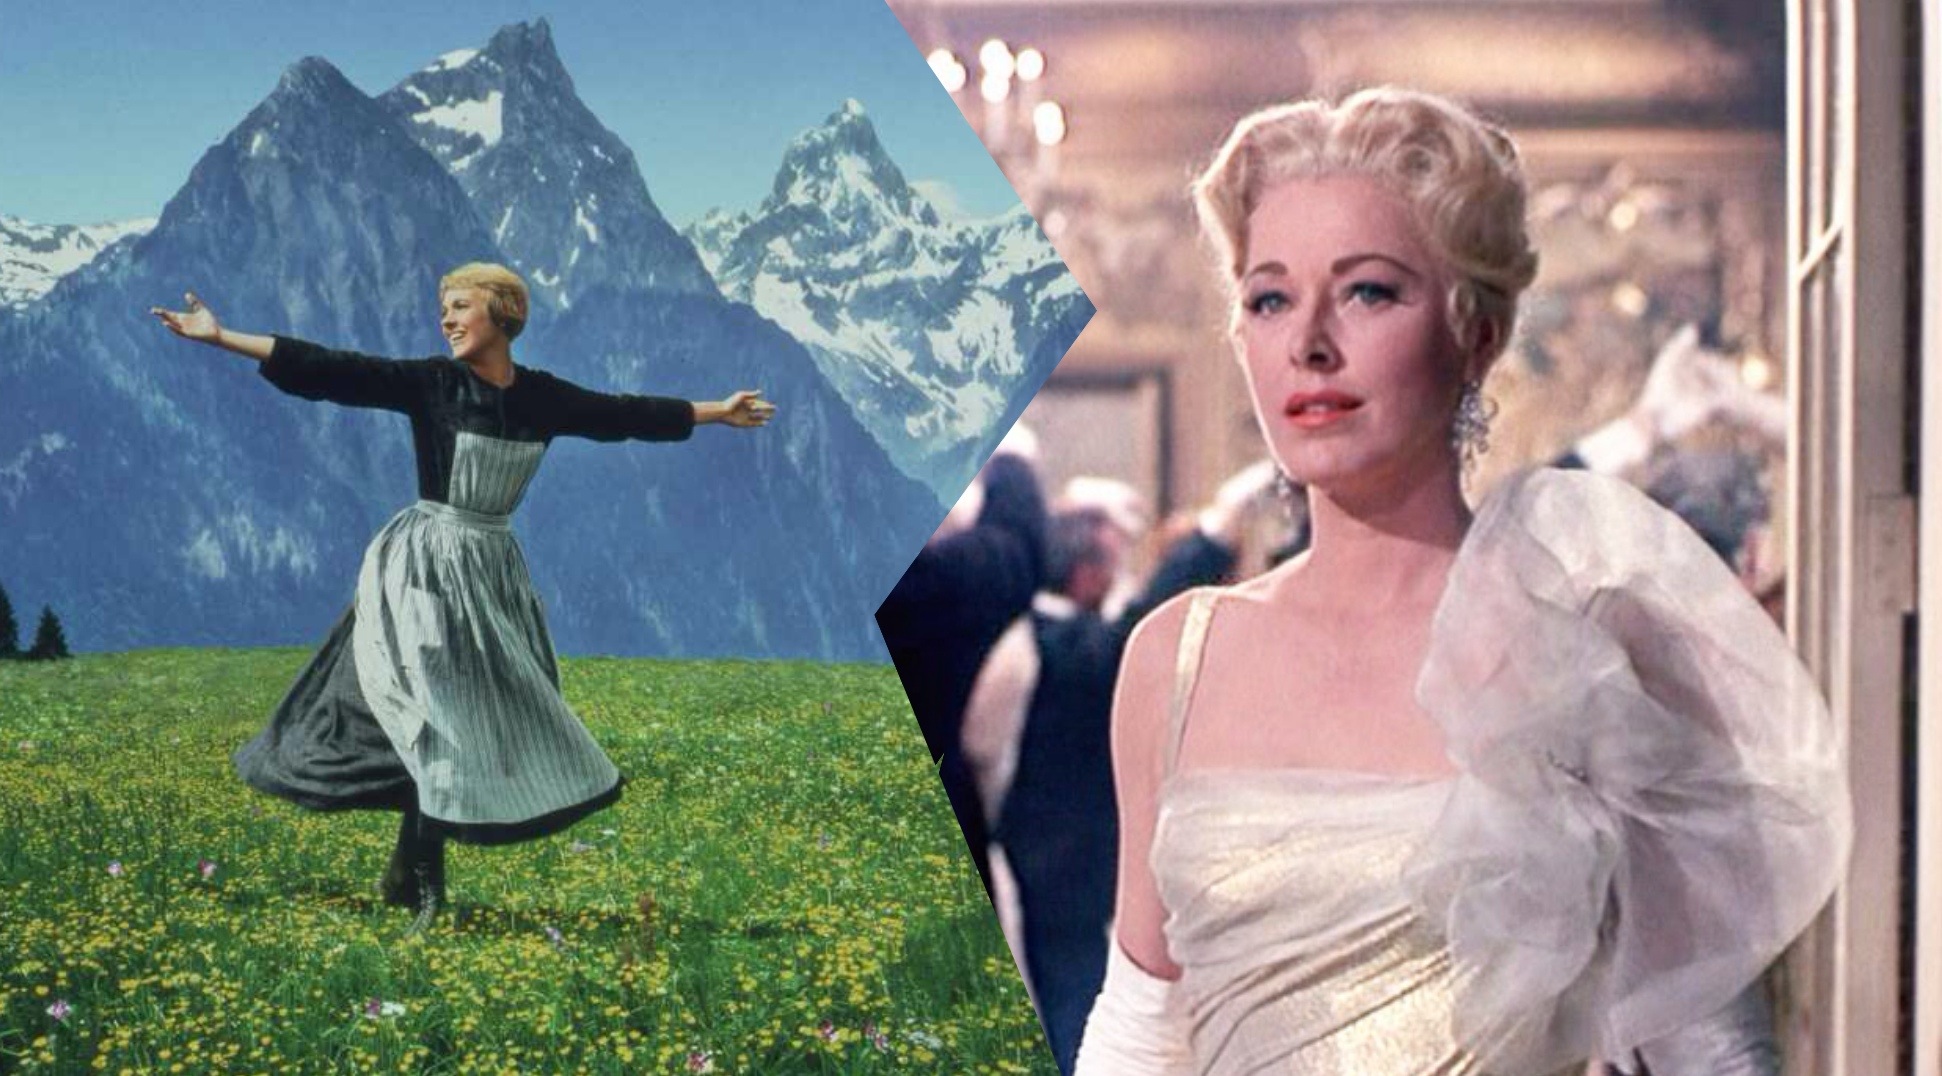 Sound Of Music Captain Von Trapp And Maria Lyrics Sound Of Music Traditional But Not